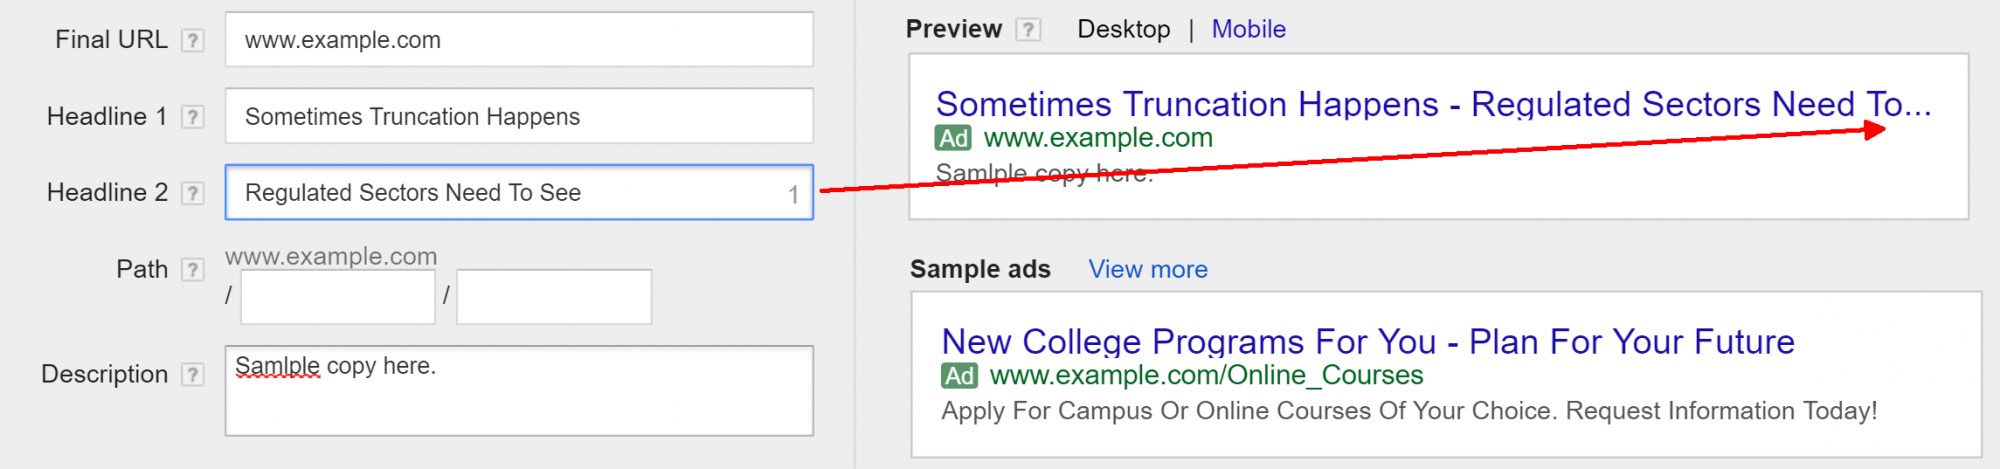 truncated-headline-adwords-preview.png